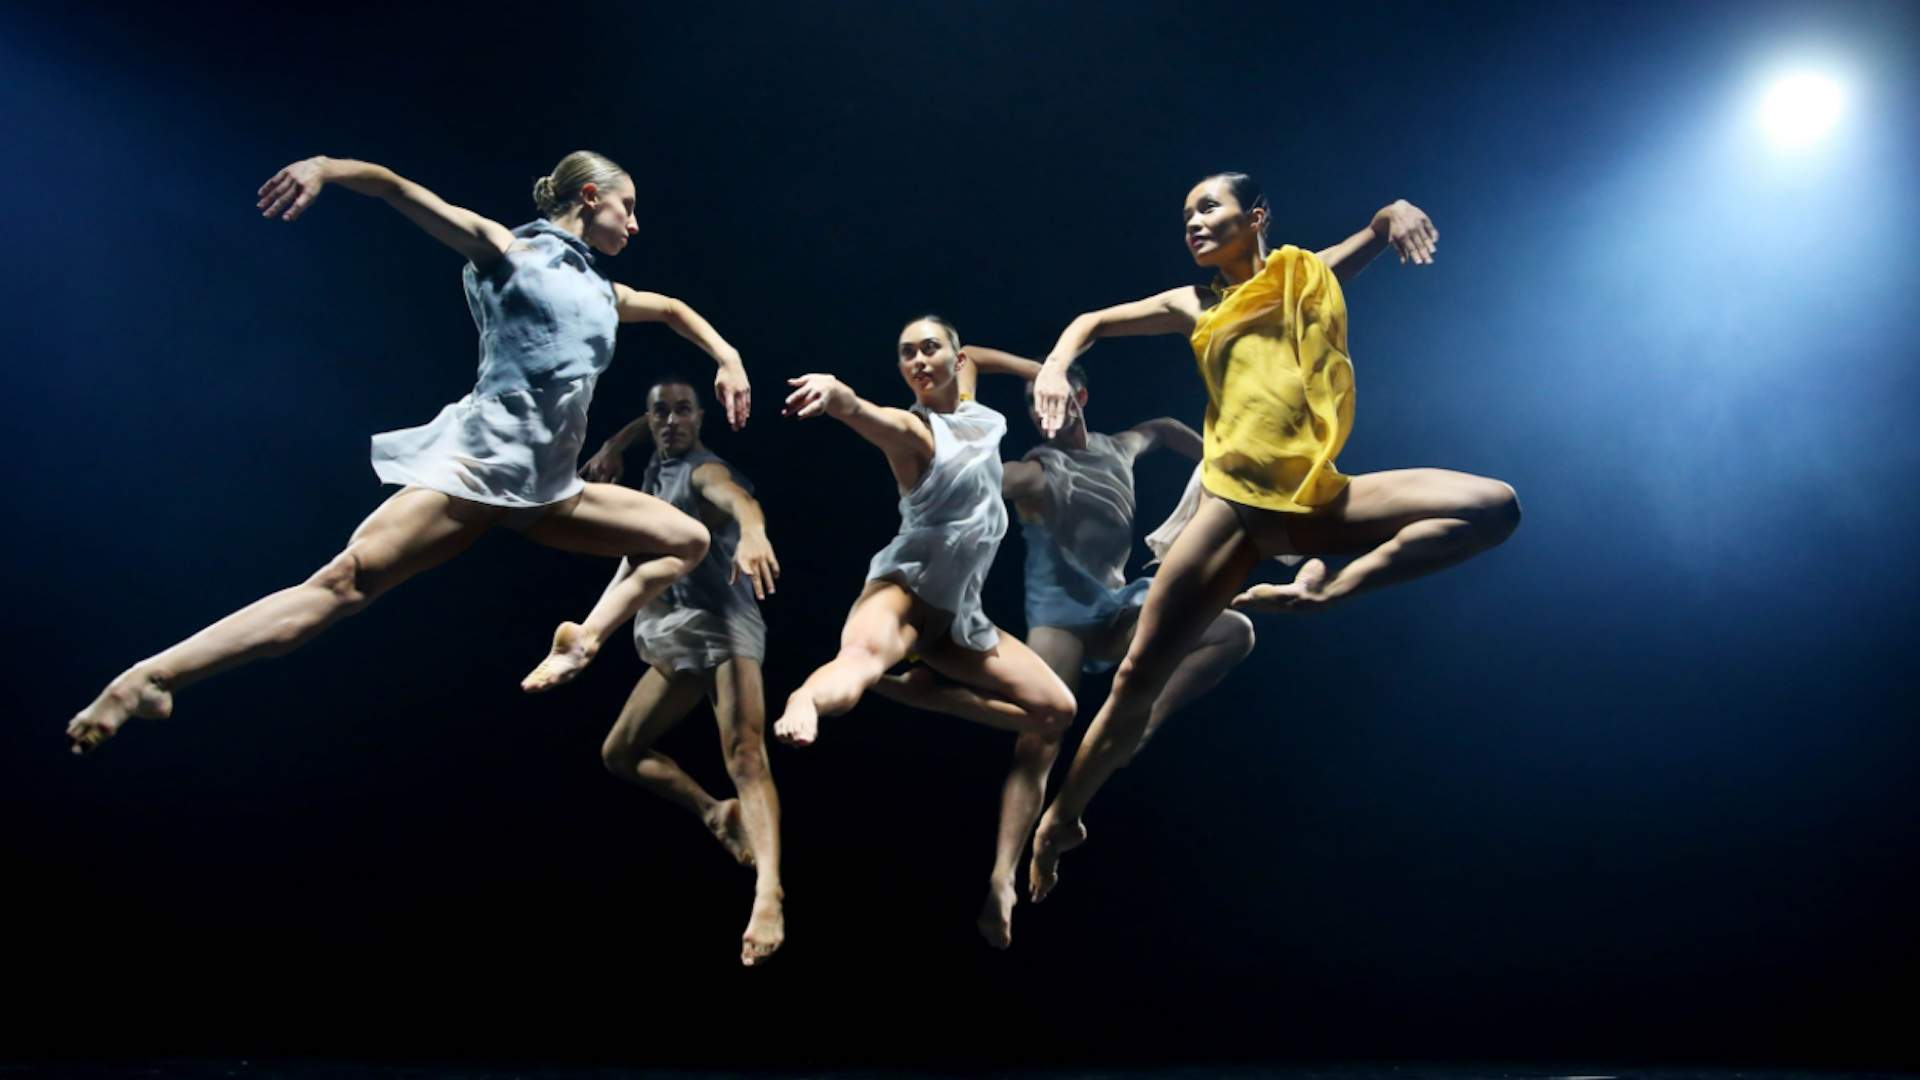 You Can Score a Set of LG Headphones and Two Dance Classes at Sydney Dance Company